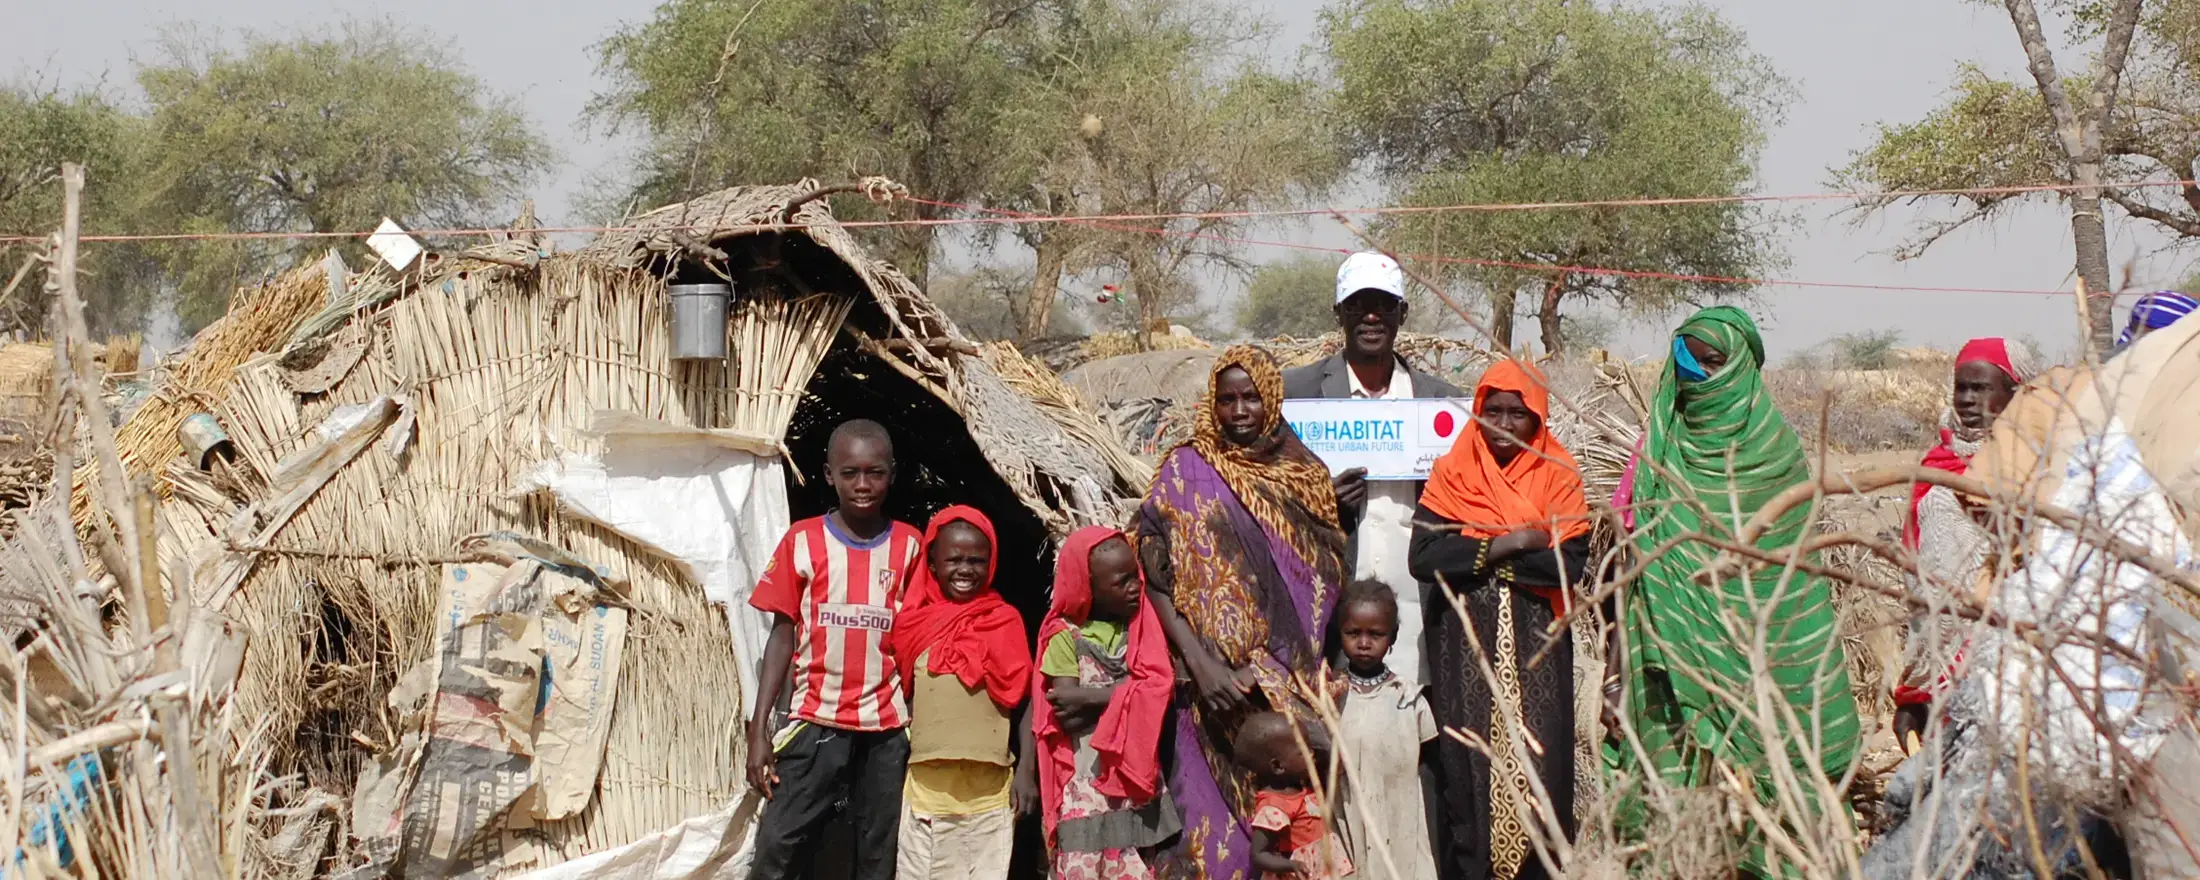 UN-Habitat visits the IDPs family in South Darfur.